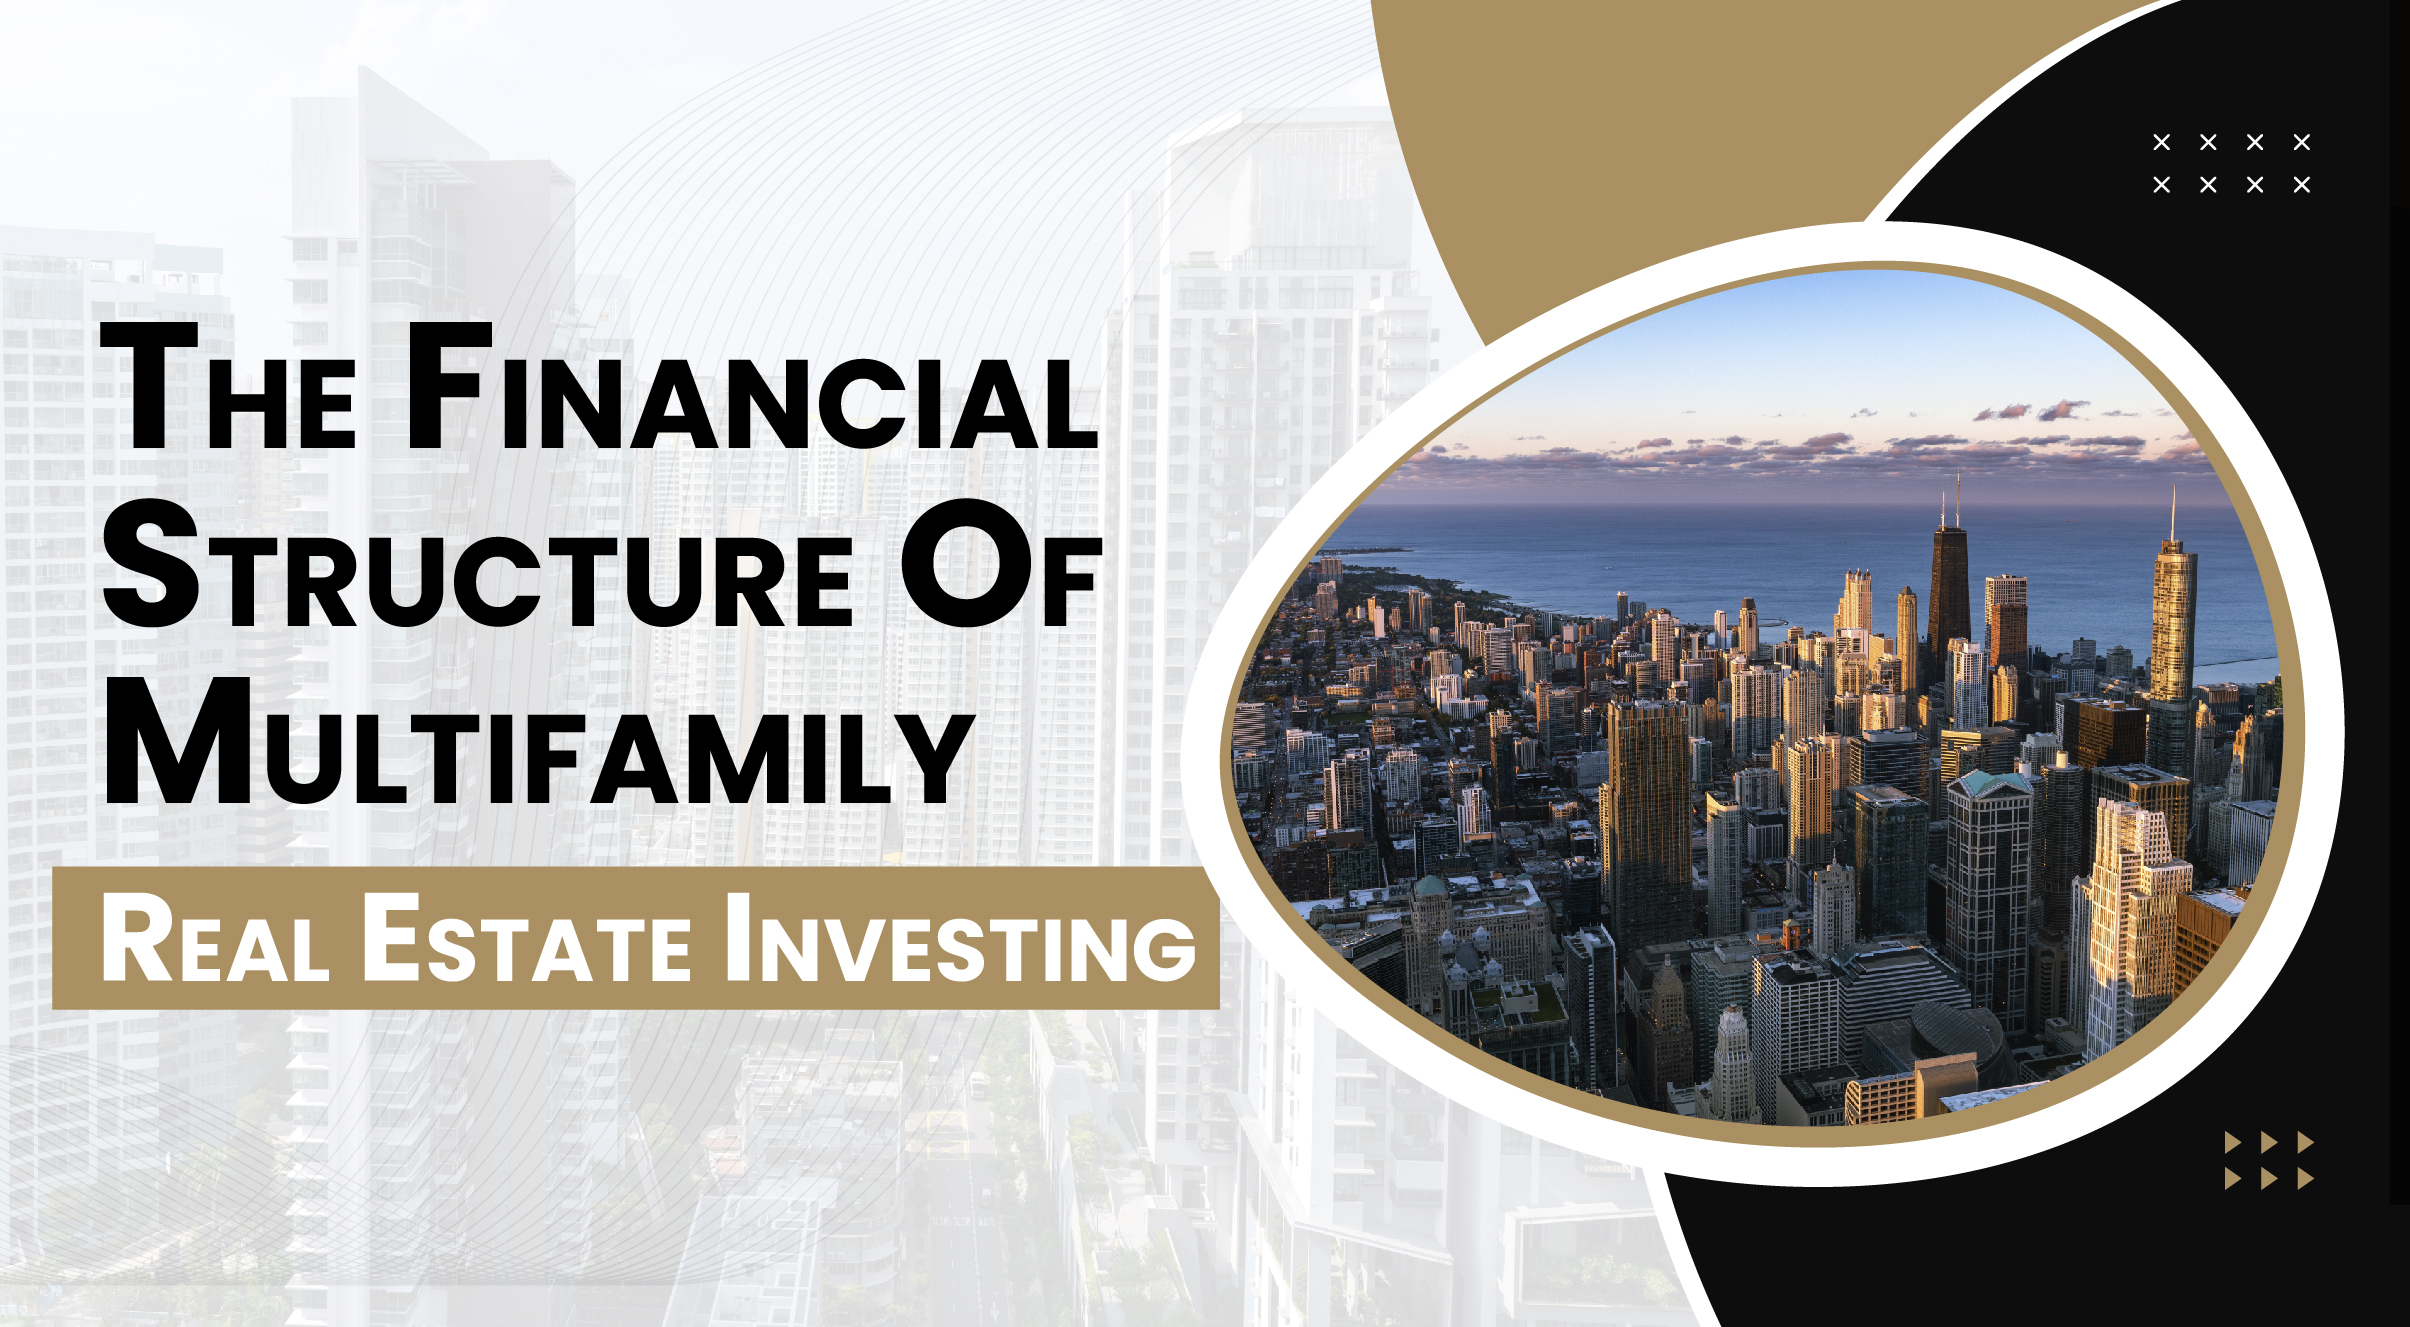 The Financial Structure Of Multifamily Real Estate Investing